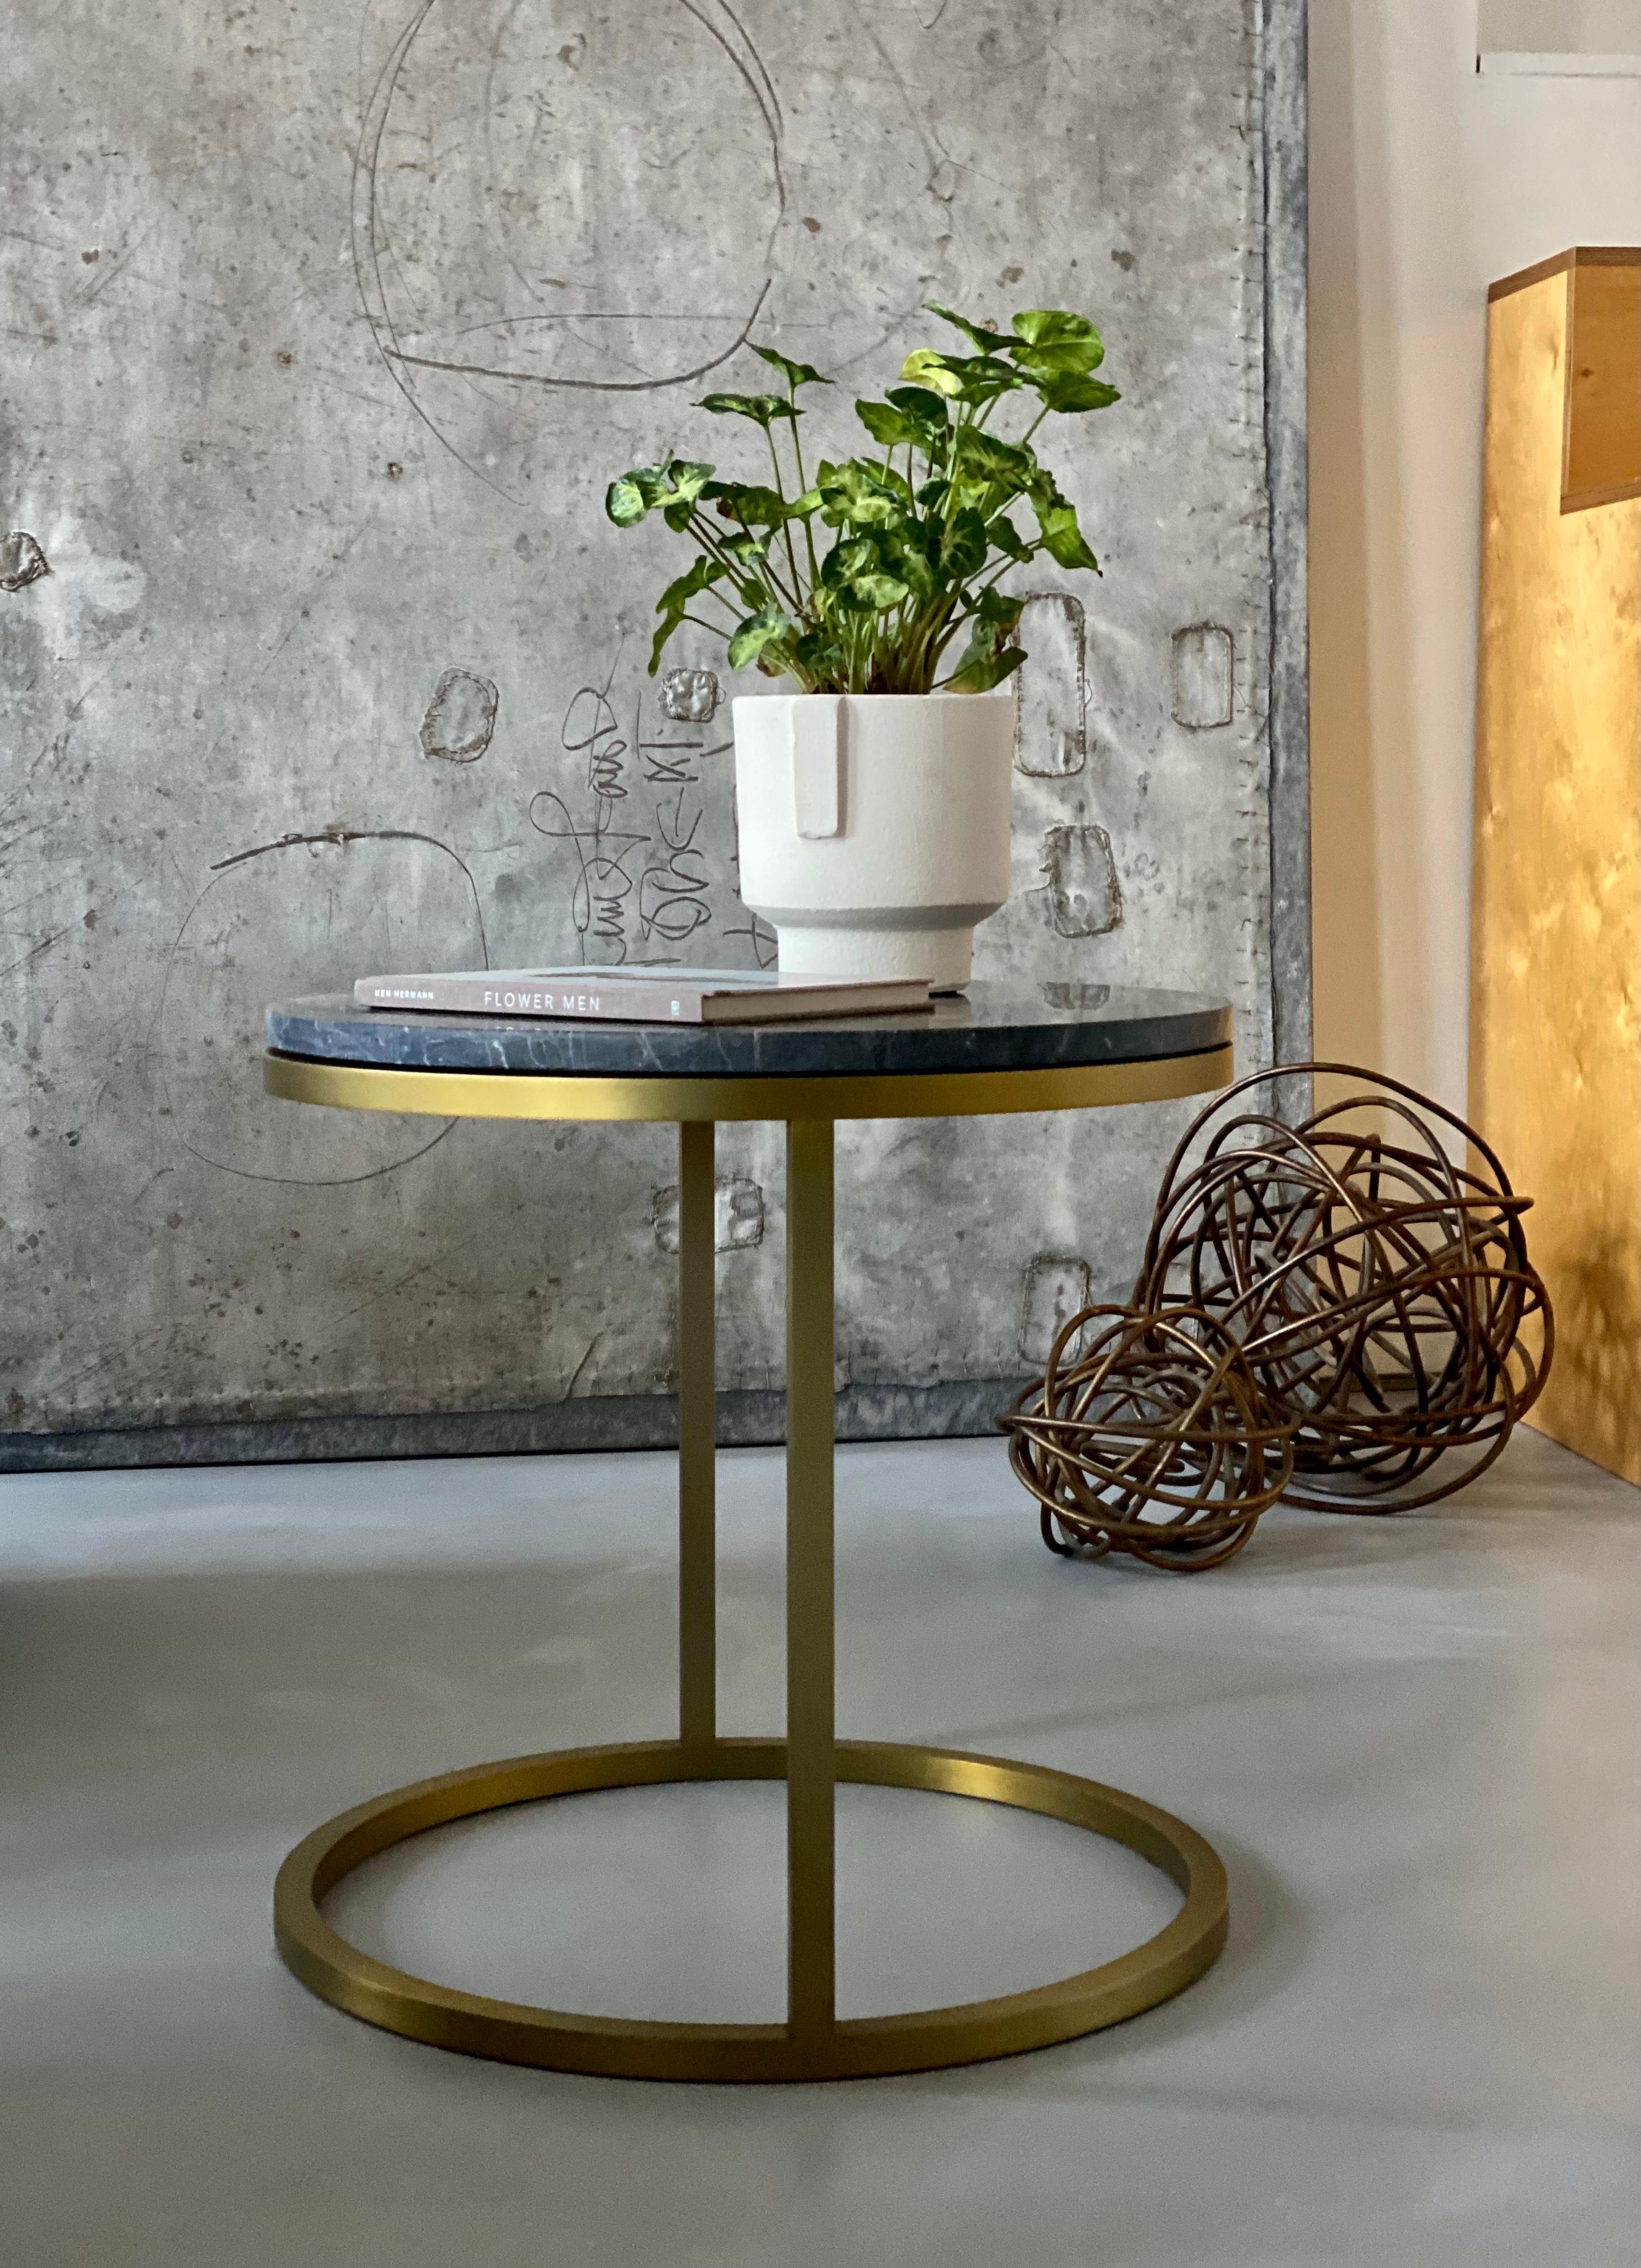 Designing small pieces of luxury furniture that are suitable for smaller homes is crucial in maximizing both functionality and aesthetics in limited spaces. The Diana round coffee table is a perfect example of this philosophy, featuring a compact